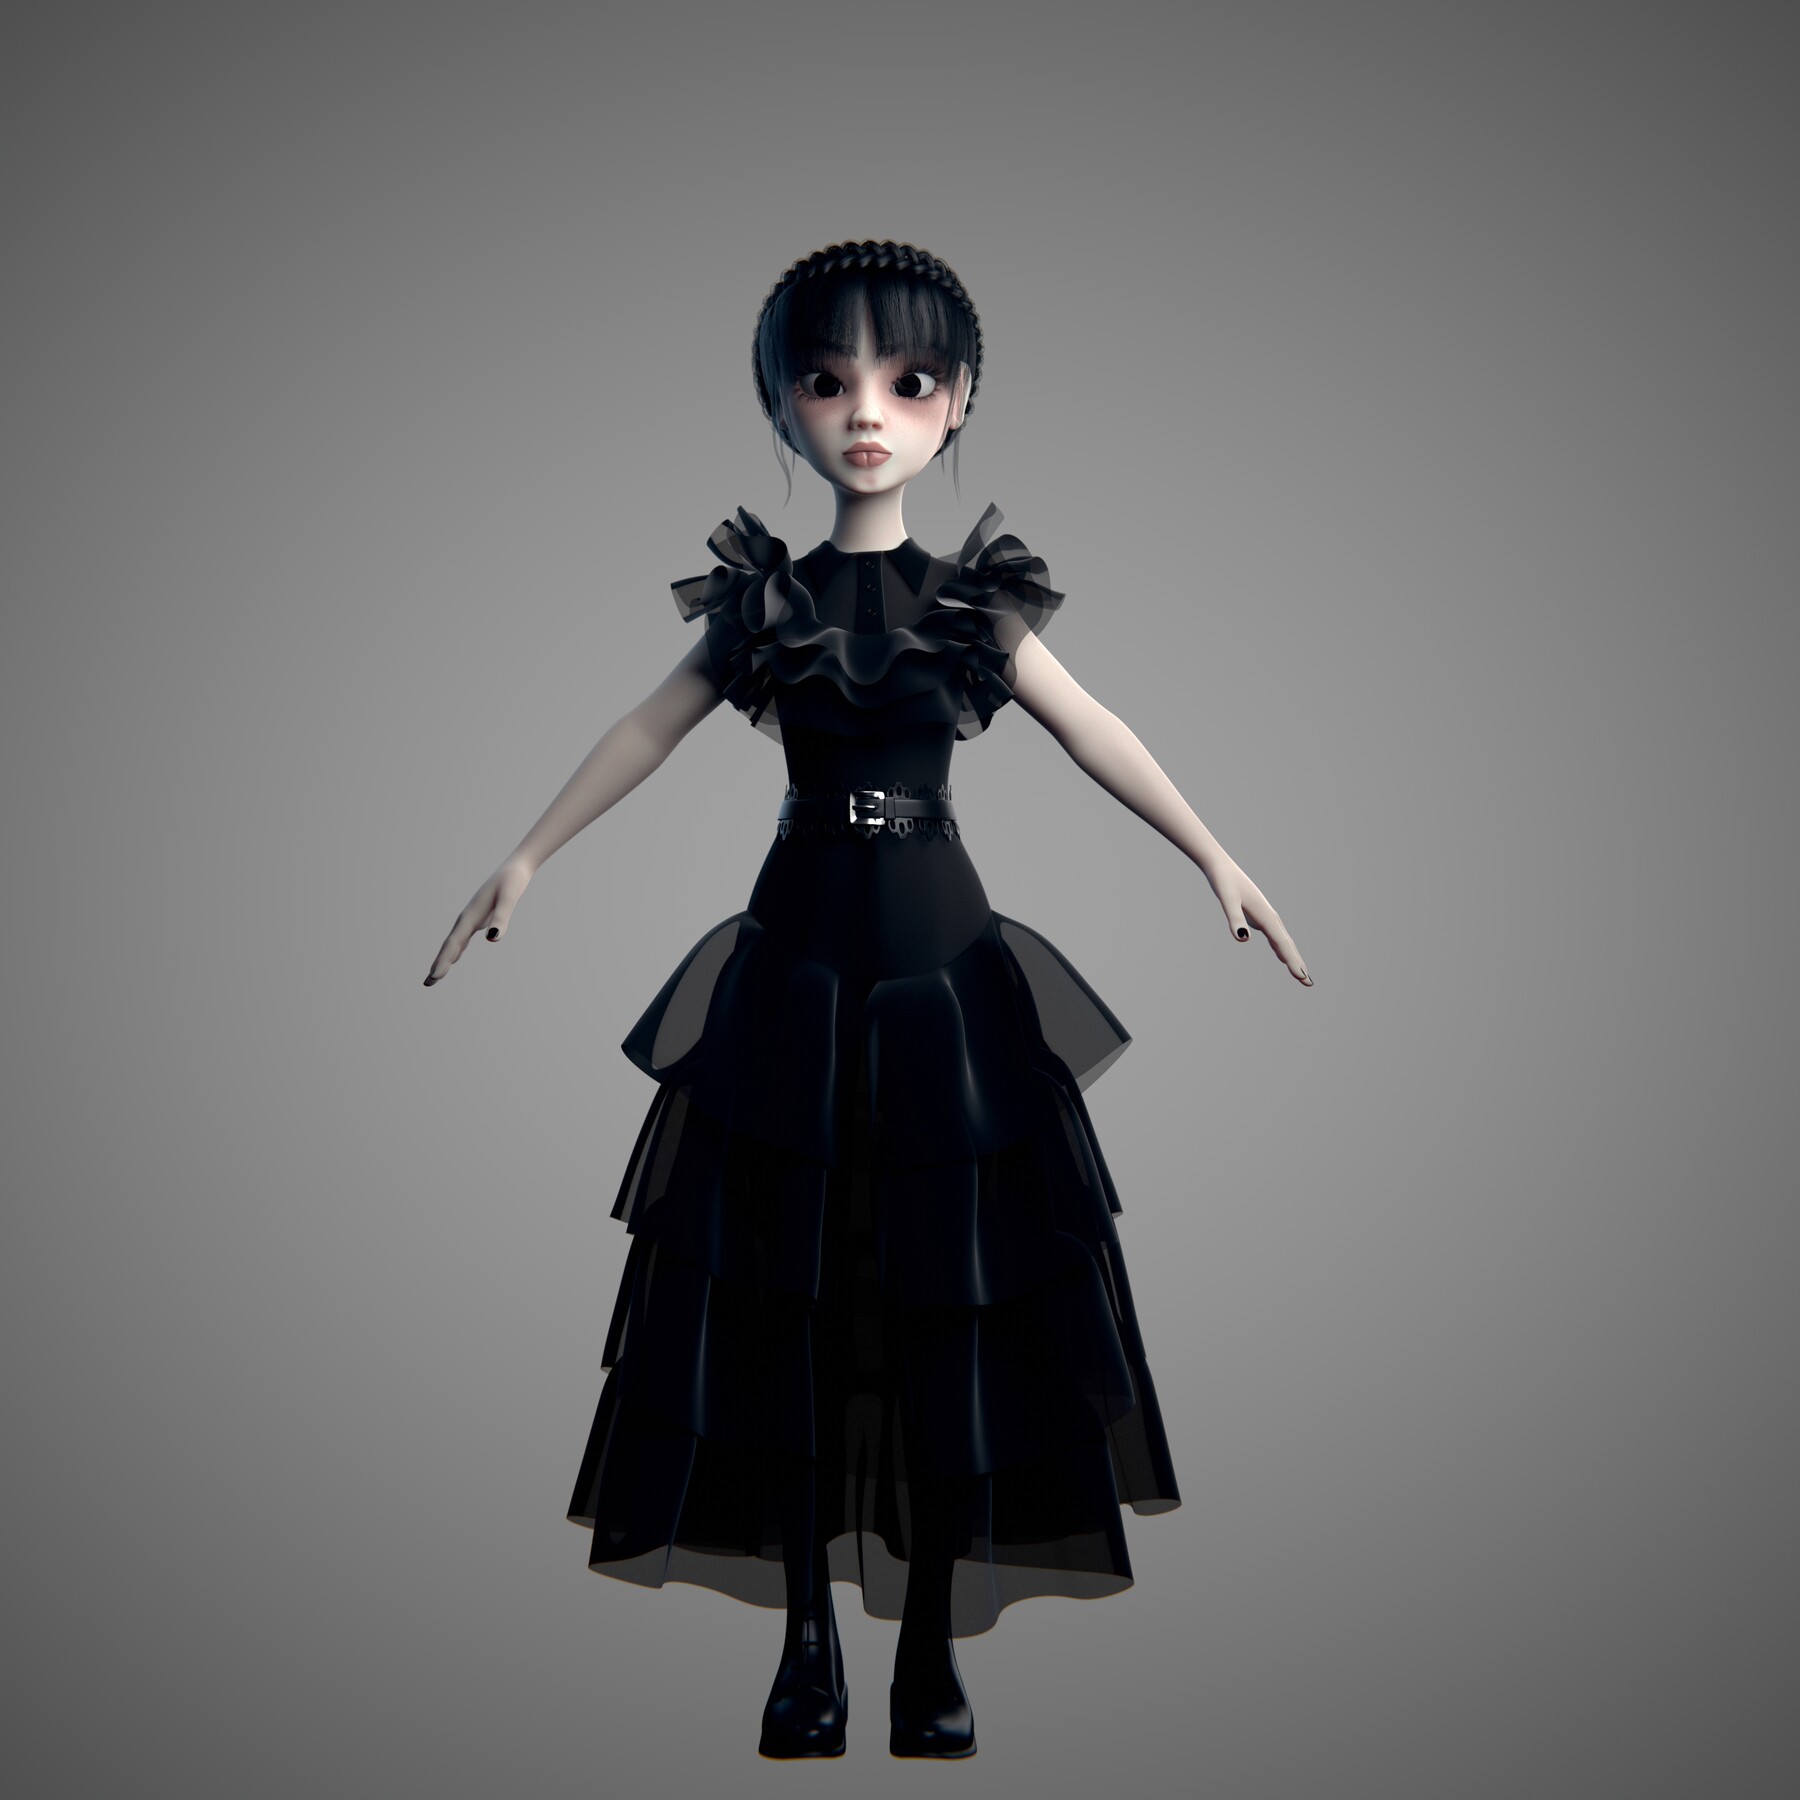 Wednesday Addams v2 - Rigged 3D Character Model Low-poly 3D model